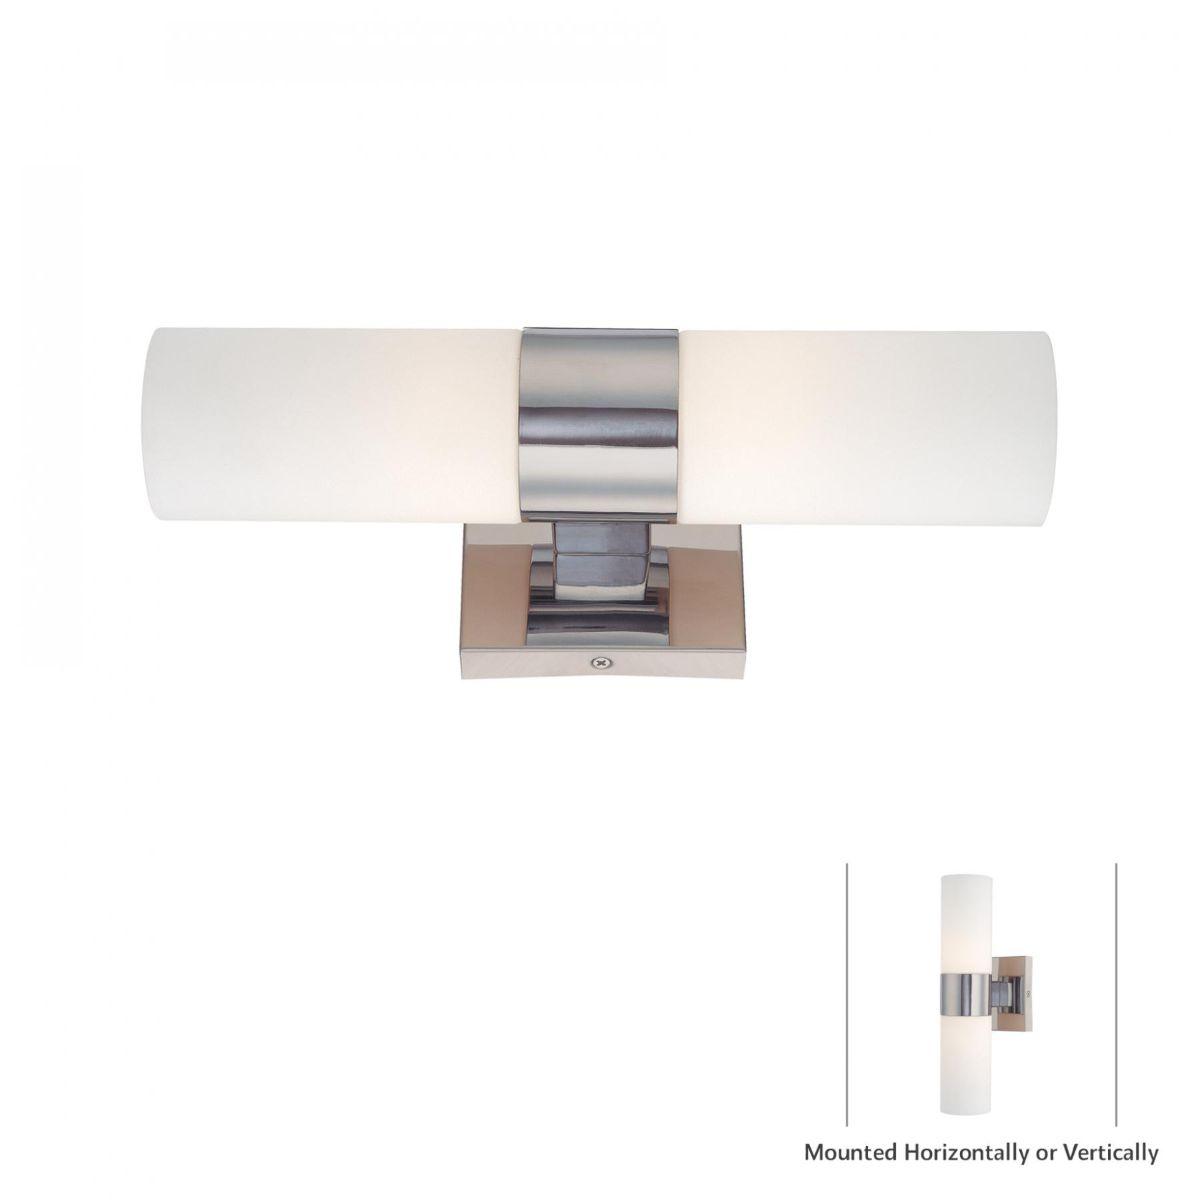 14 in. Armed Sconce - Bees Lighting